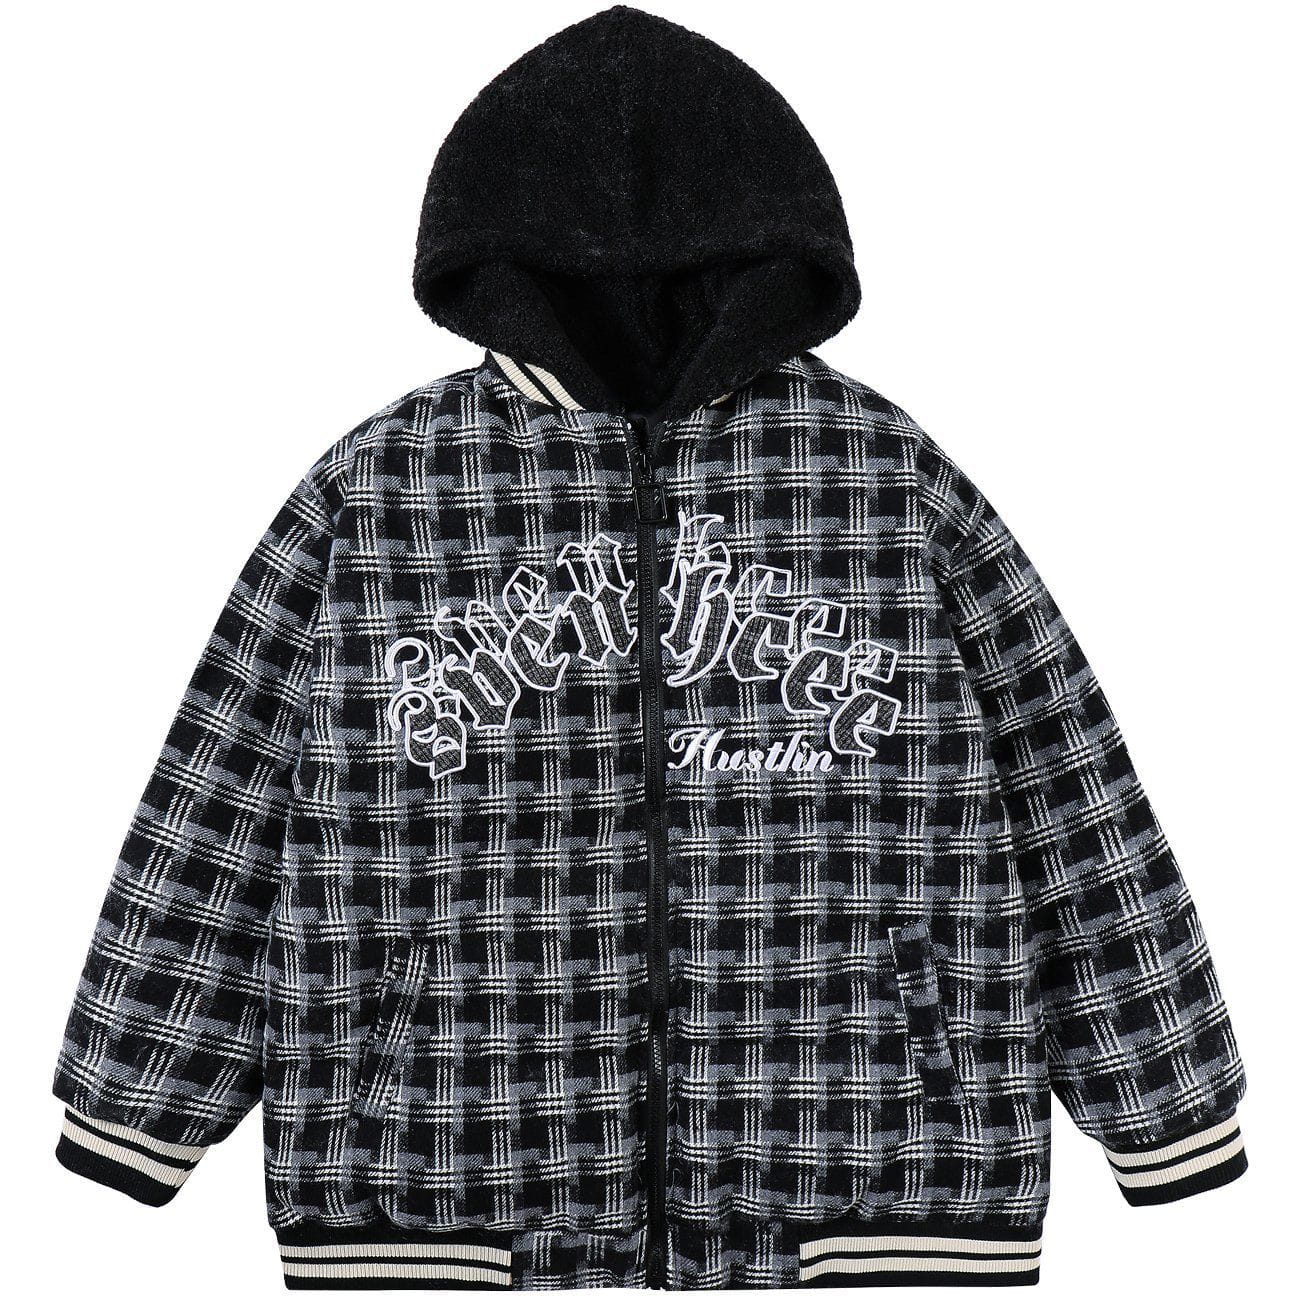 Majesda® - Plaid Patchwork Embroidery Hooded Winter Coat outfit ideas streetwear fashion